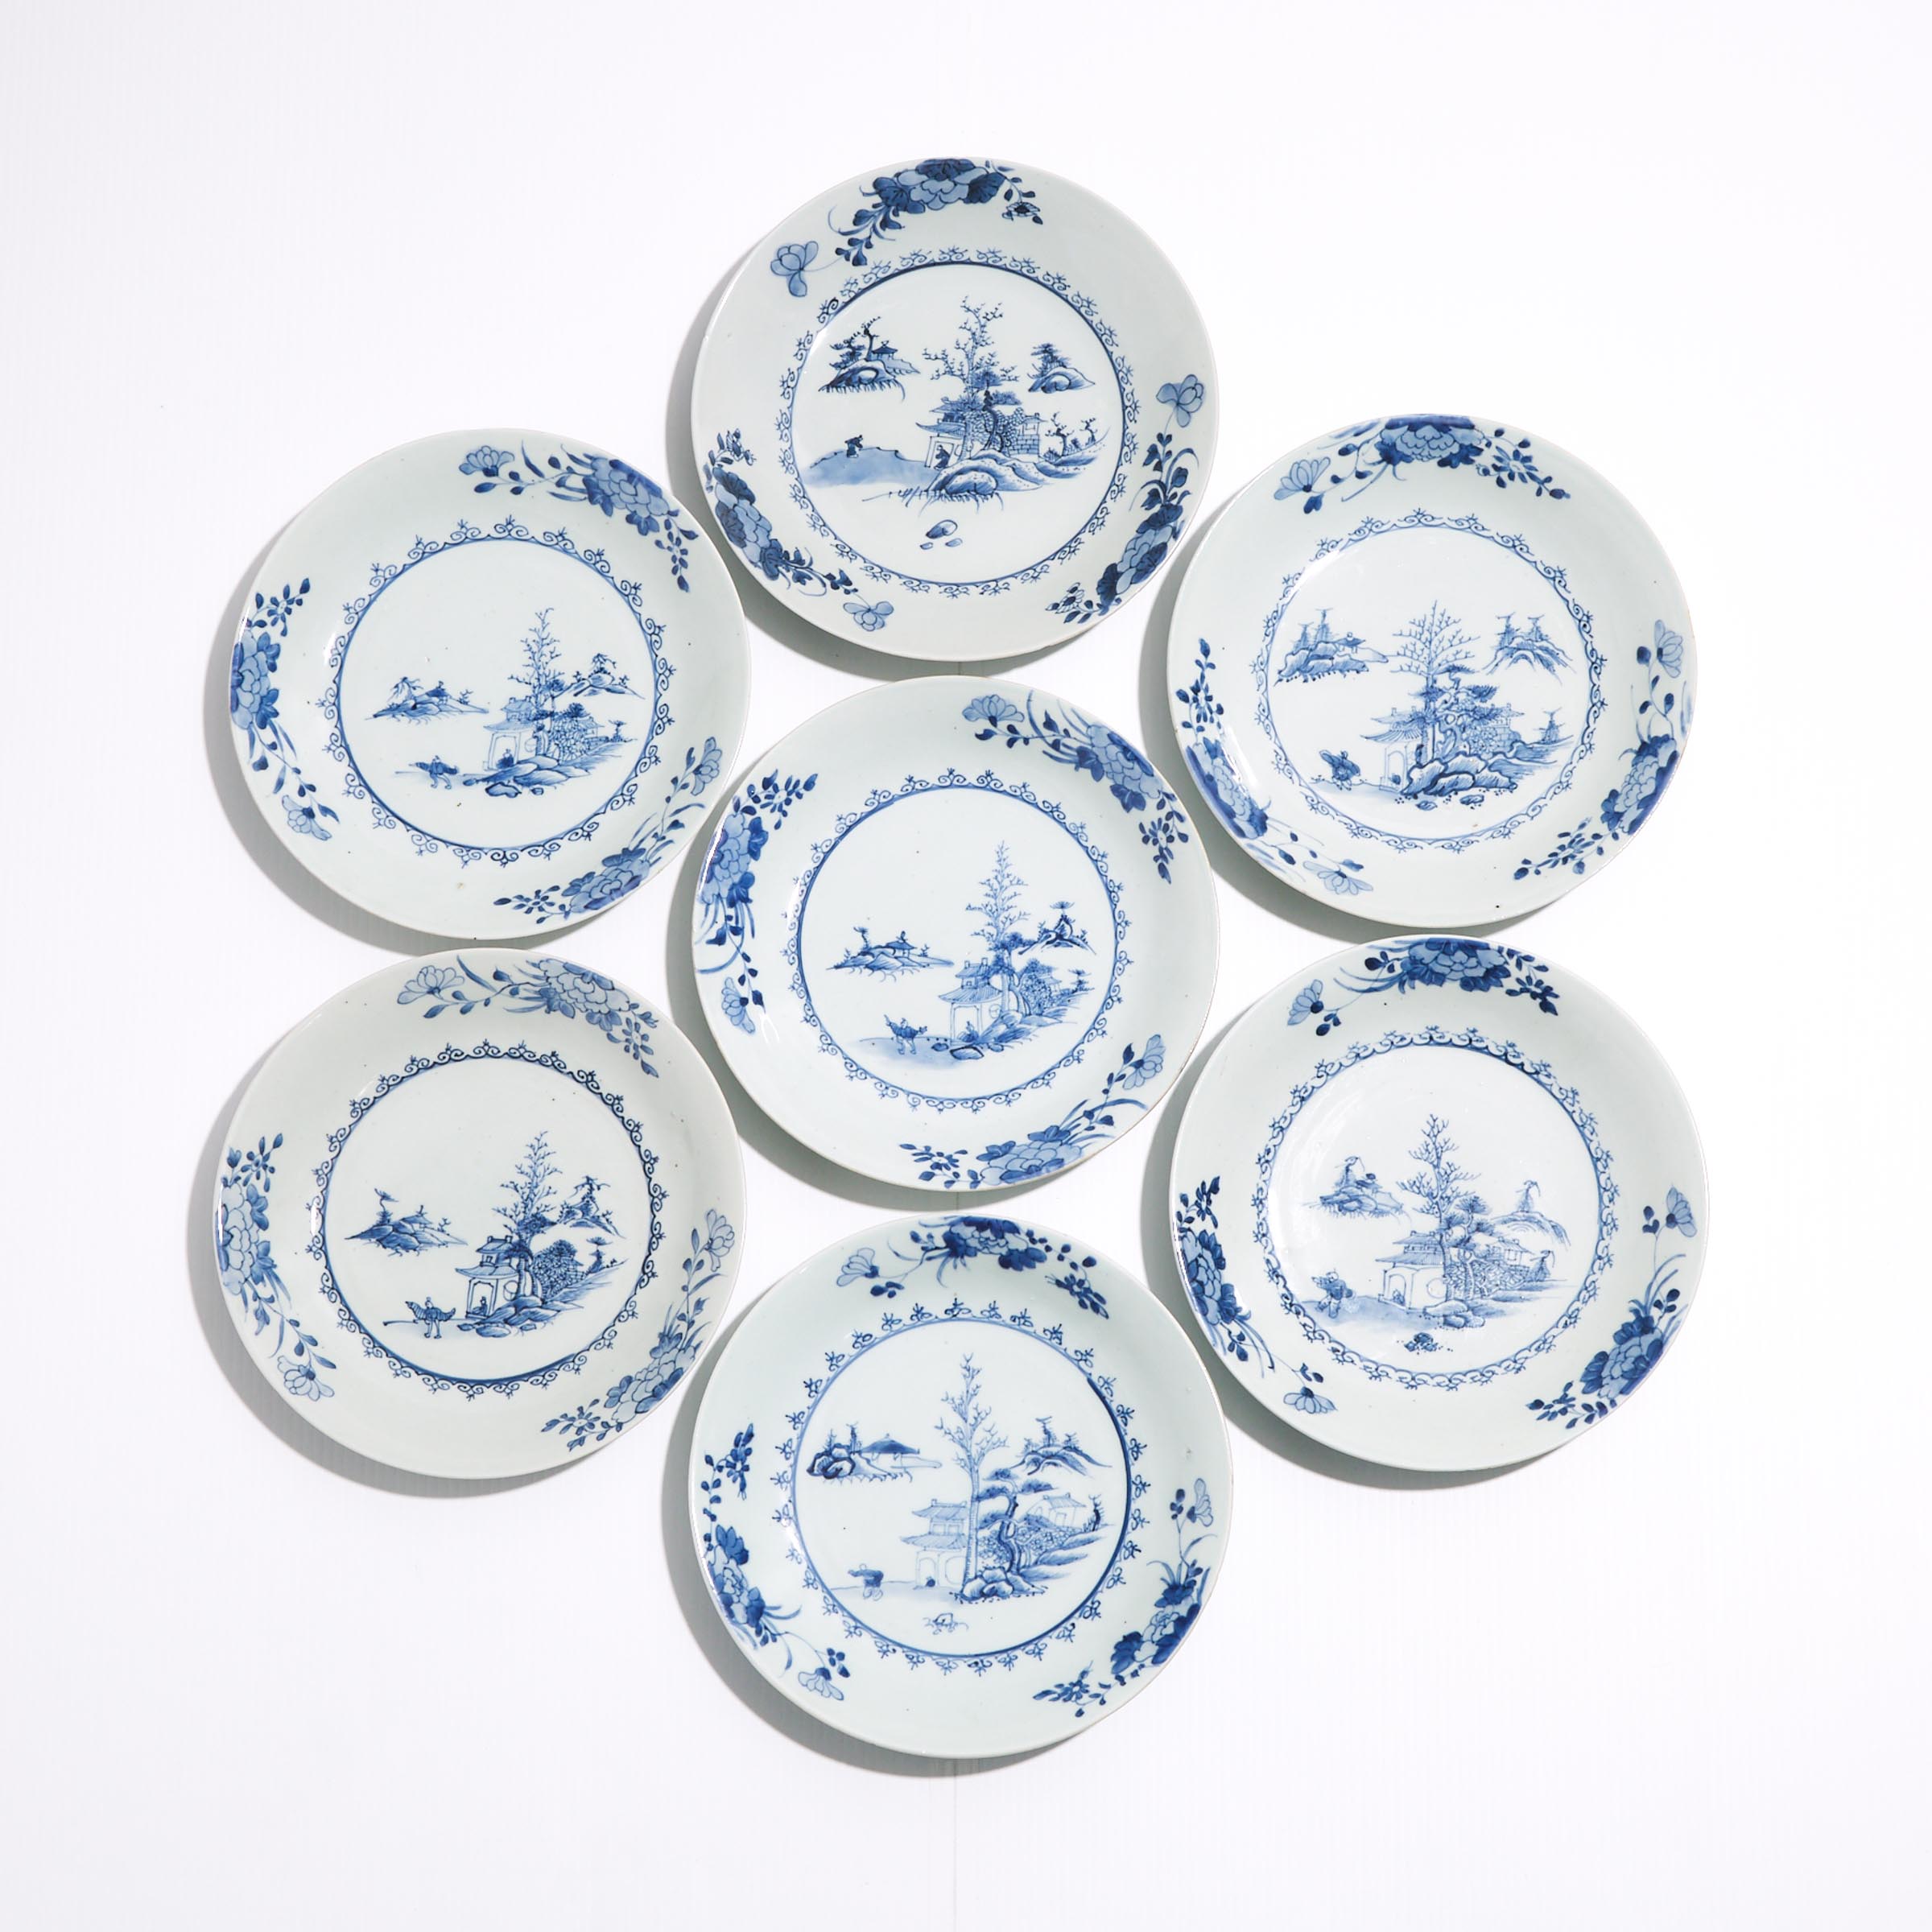 A Set of Seven 'Leaping Boy' Pattern Saucer Dishes from the Nanking Cargo, Qianlong Period, Circa 1750